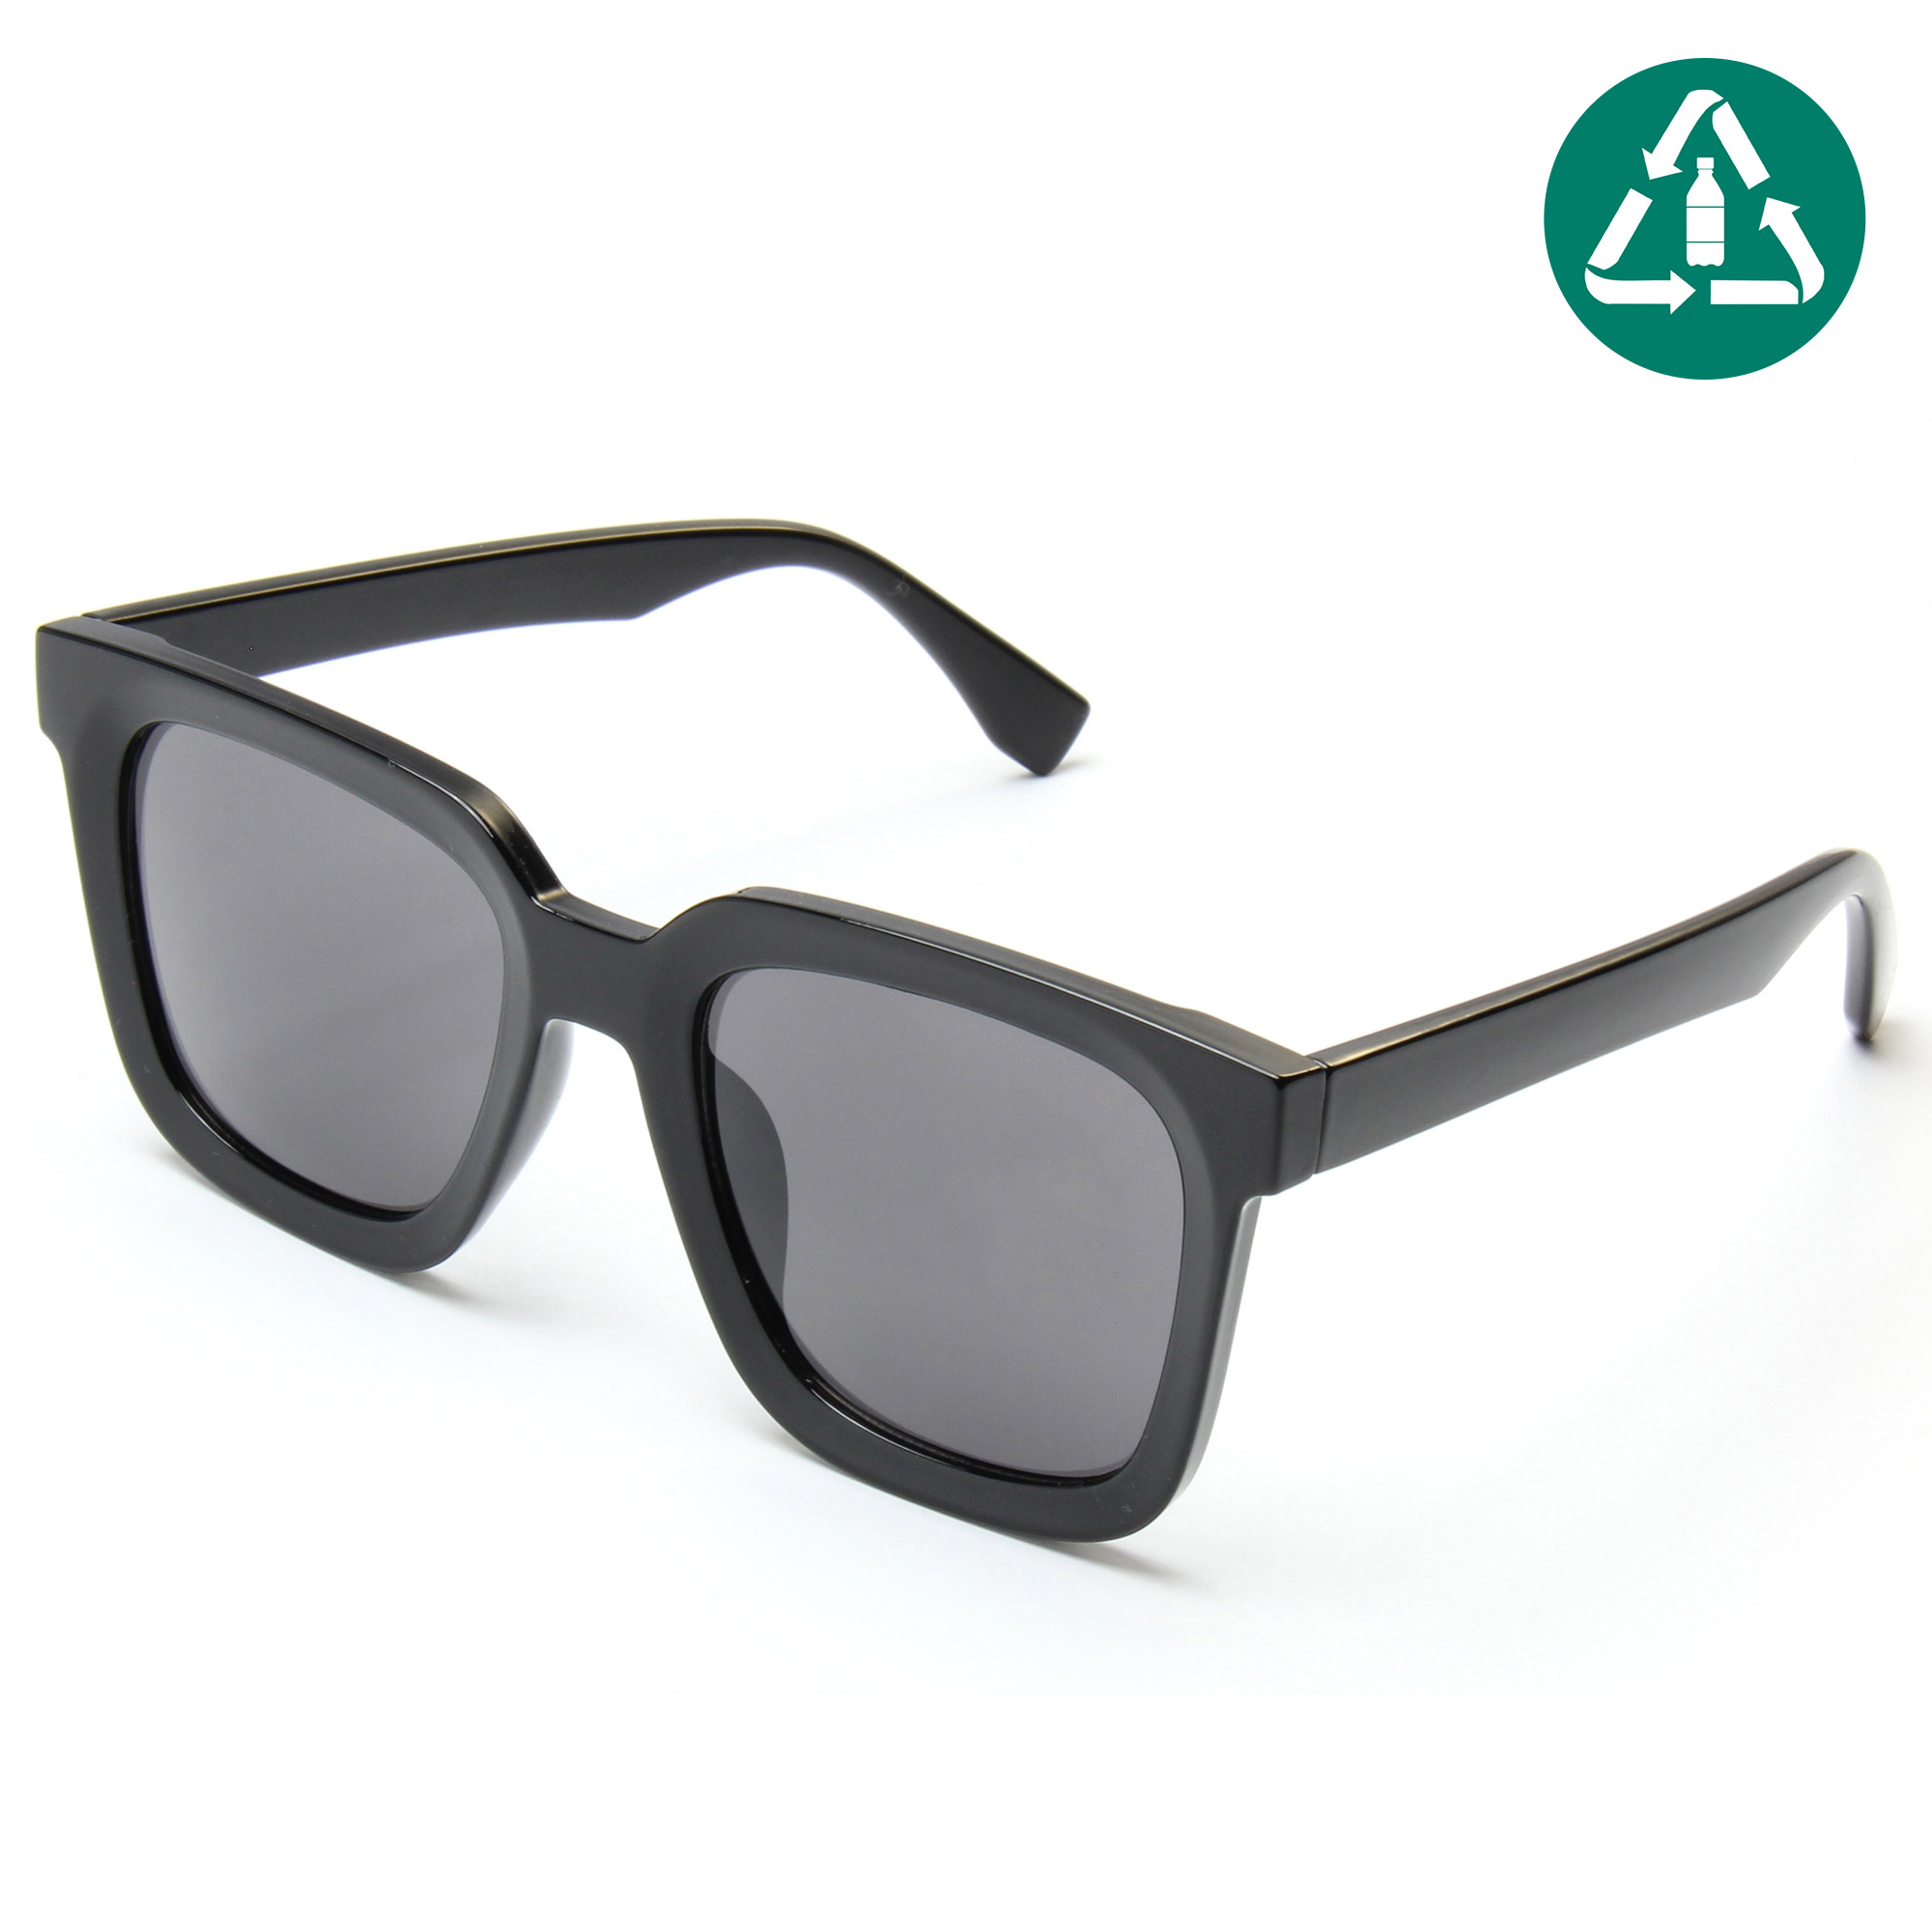 EUGENIA 2021 Square Frames Black Lens Fashion 100% RPCTG Recycled Sunglasses